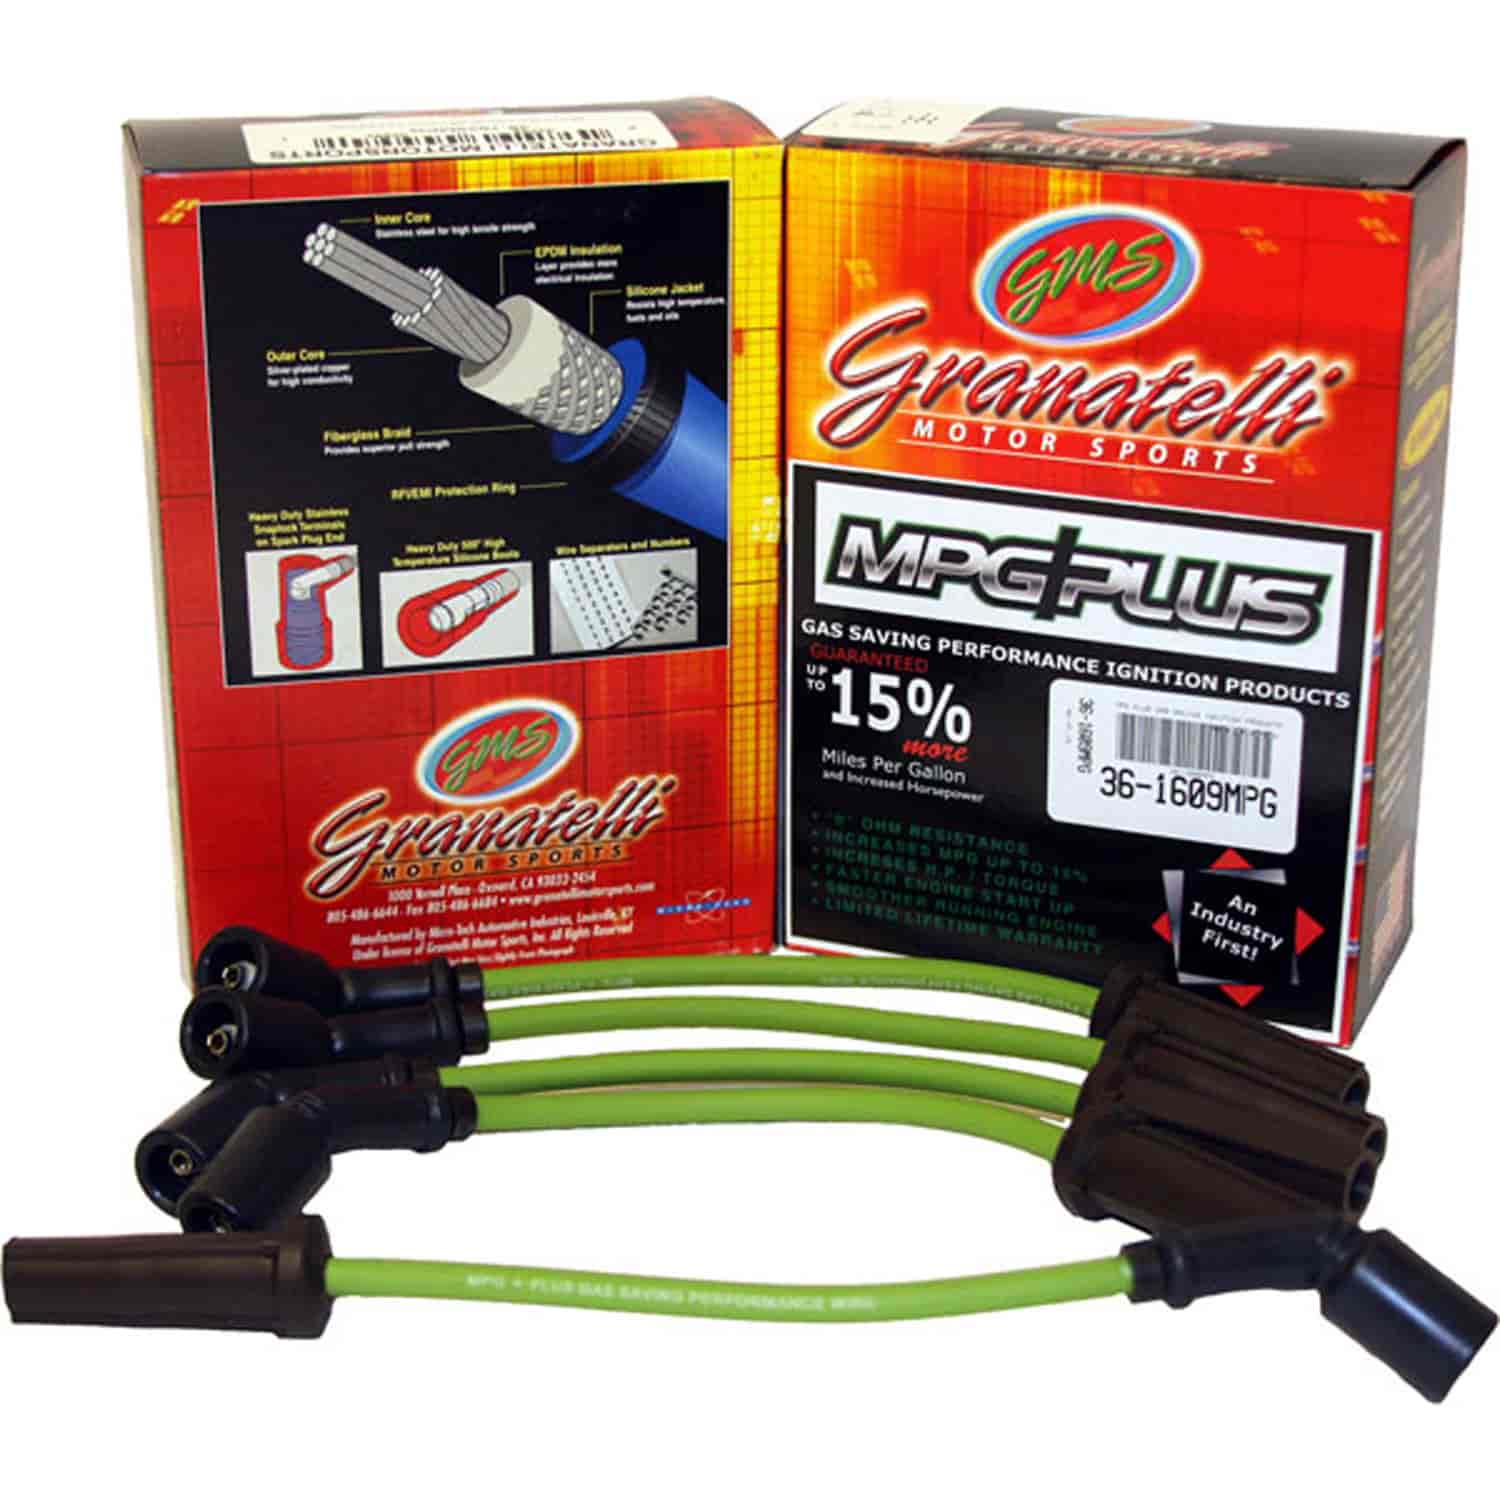 MPG Wires HYUNDAI ACCENT 4CYL 1.5L 97-03